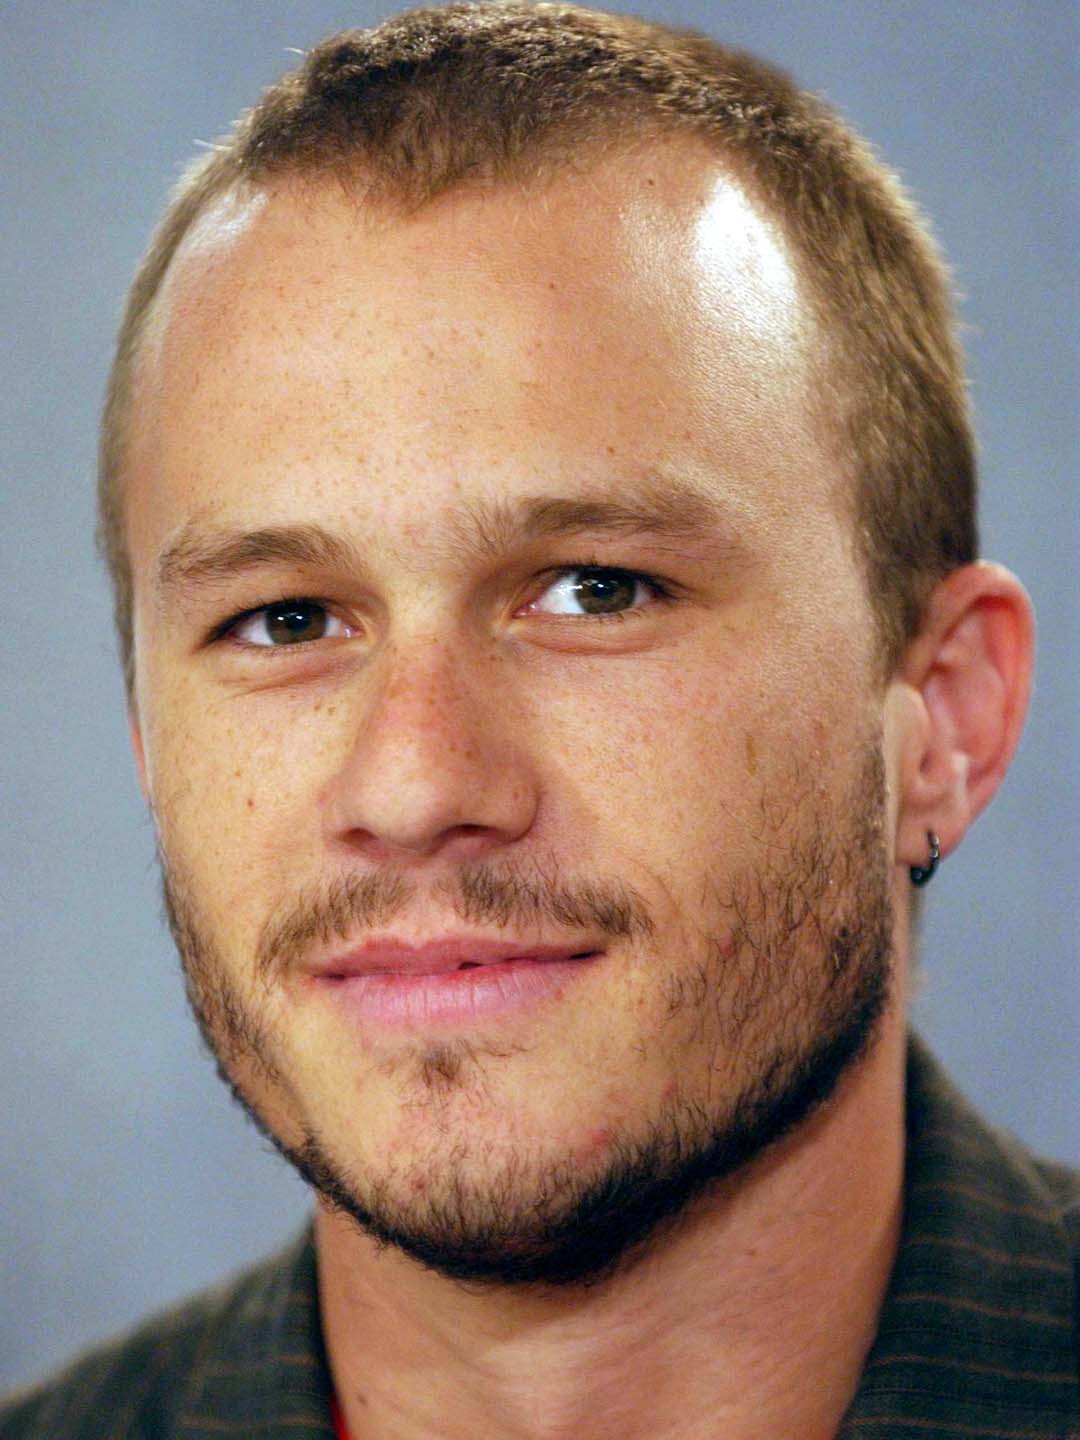 Director Stephen Gaghan Shares Heartbreaking New Details About Heath Ledger’s Death